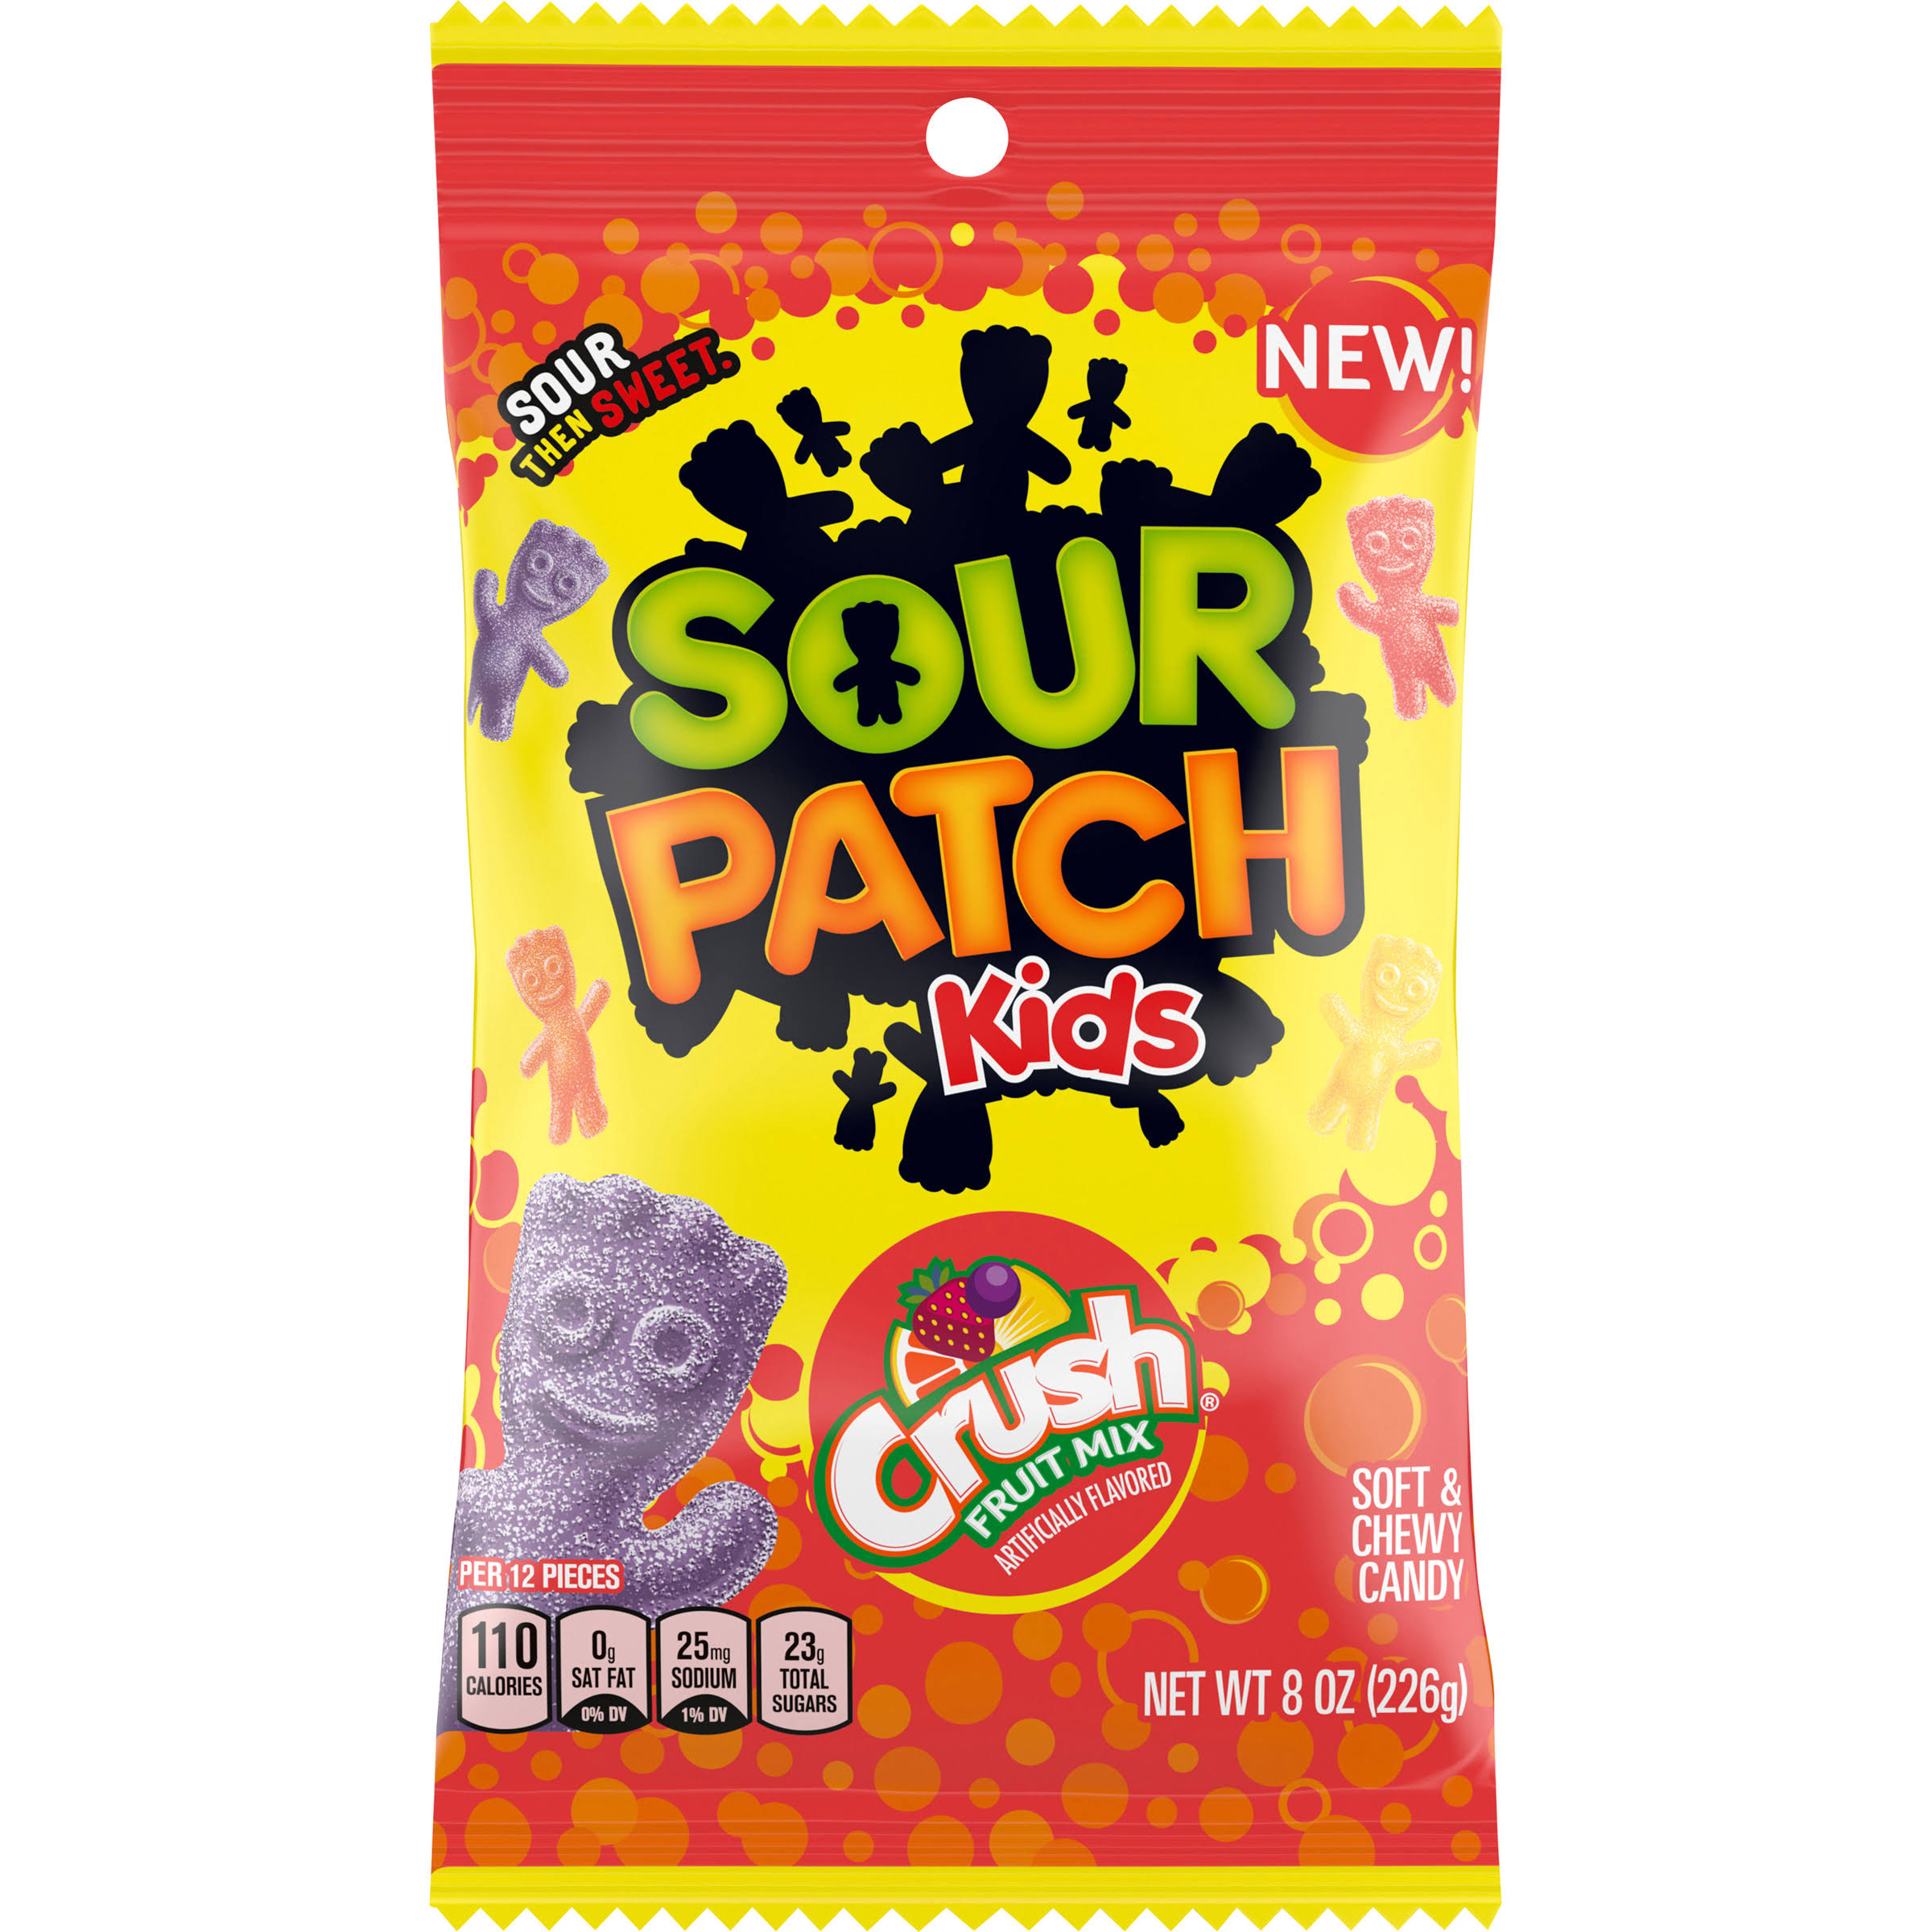 Sour Patch Kids Candy, Crush Fruit Mix, Soft & Chewy - 8 oz